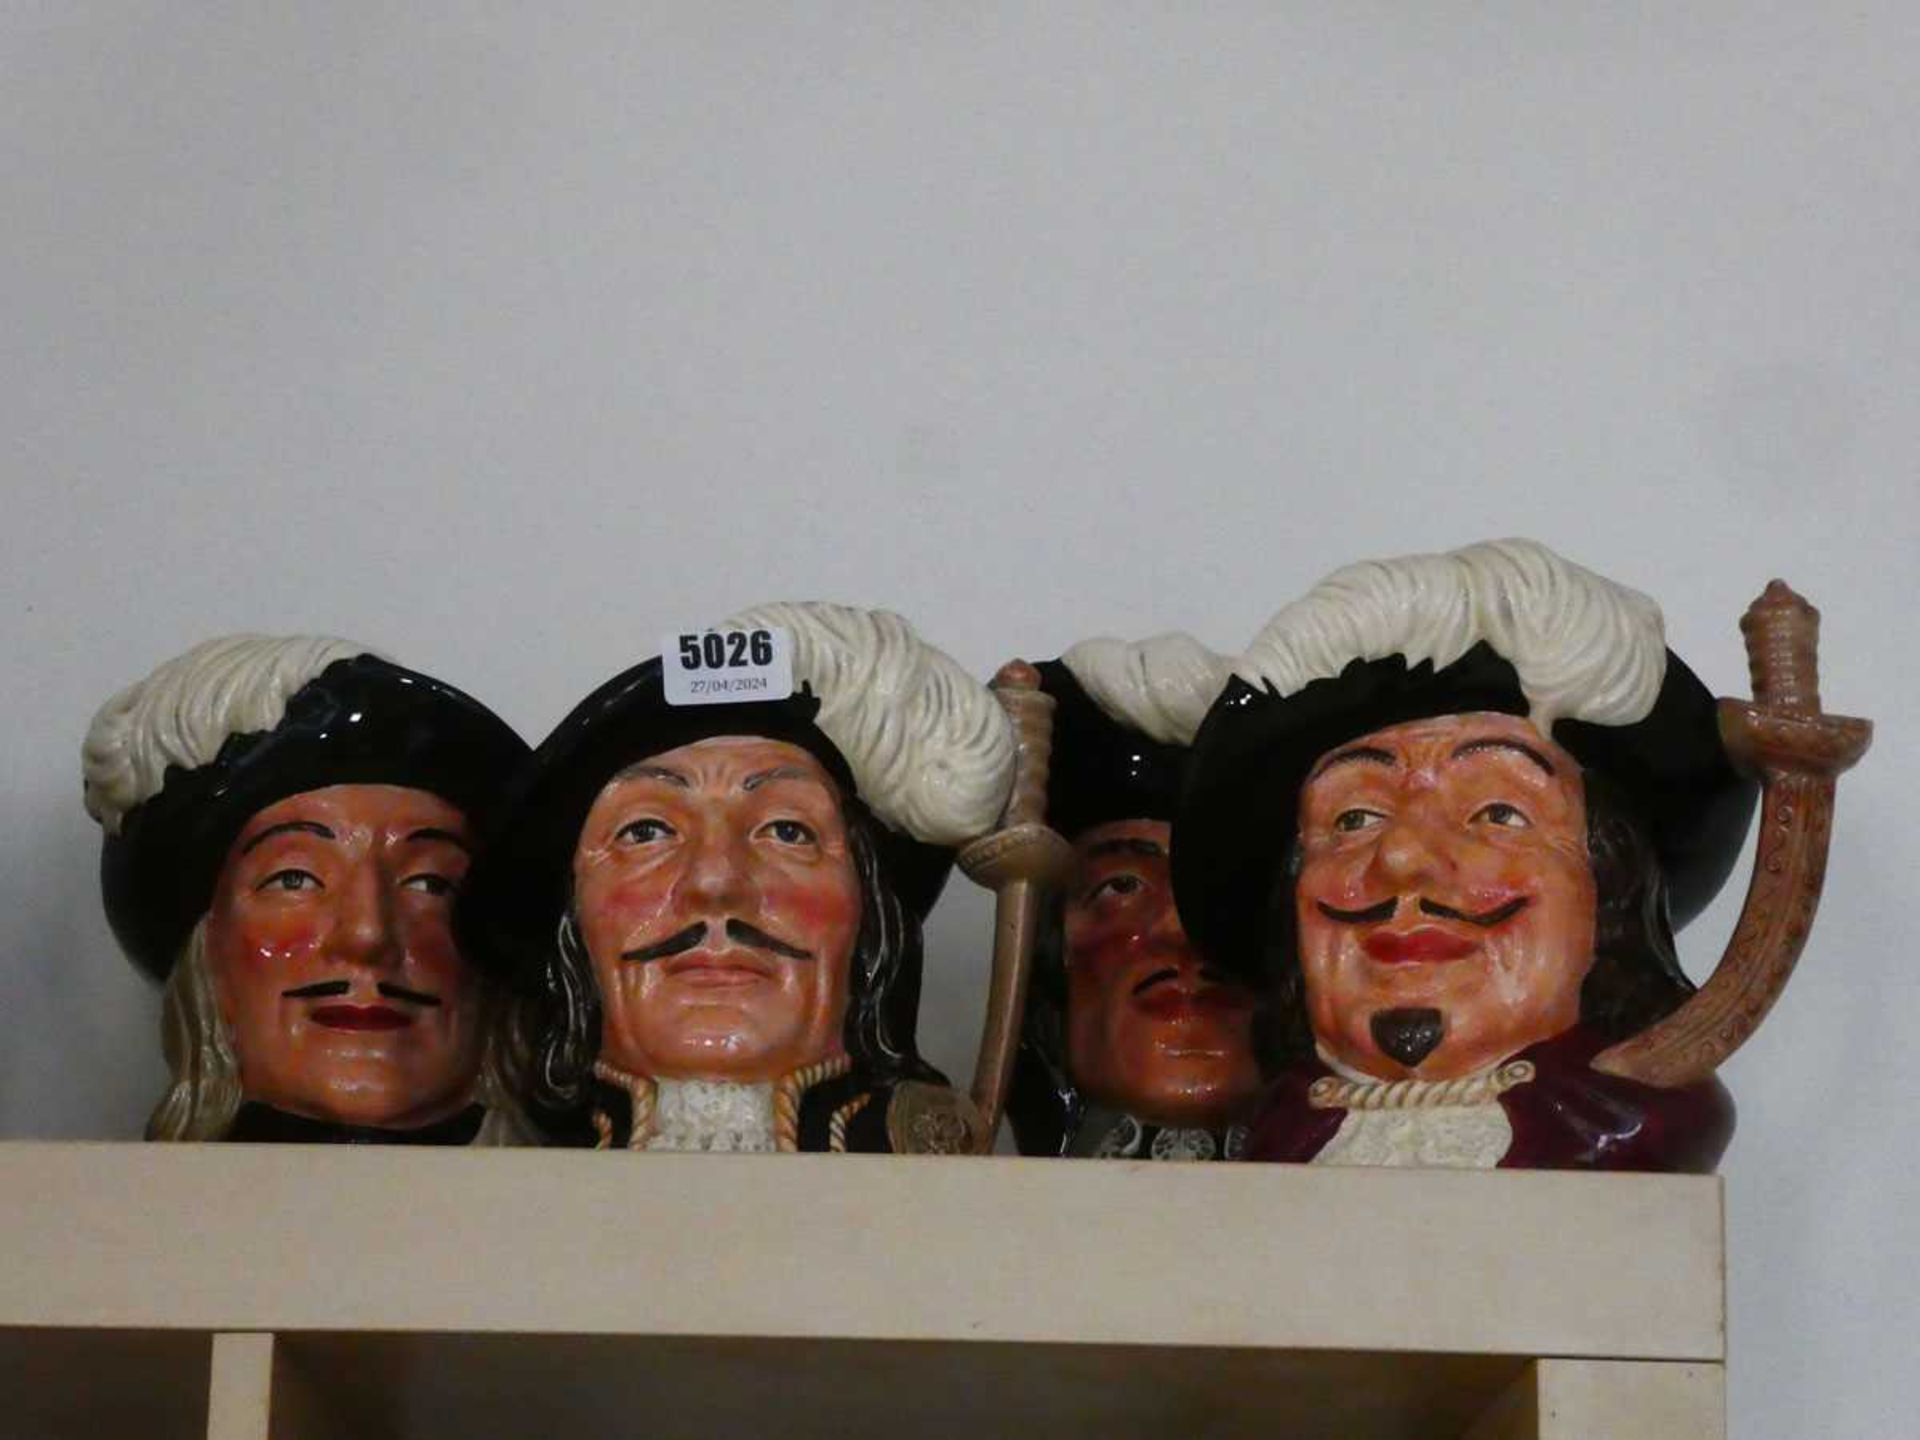 4 Character Jugs depicting The Musketeers